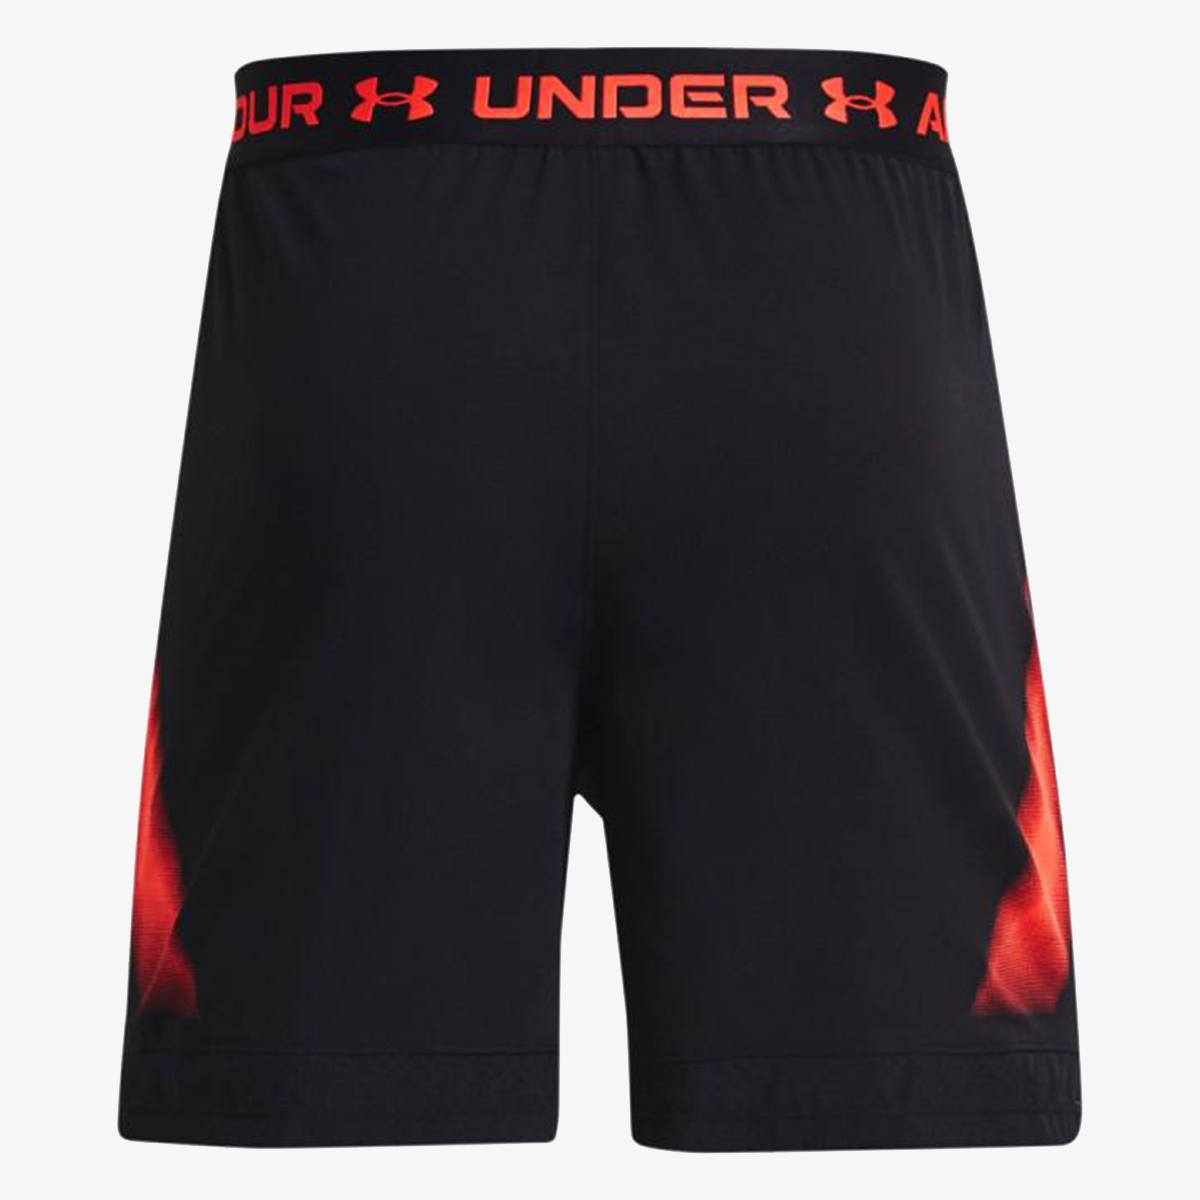 Under Armour UA Vanish Wvn 6in Grphic Sts 